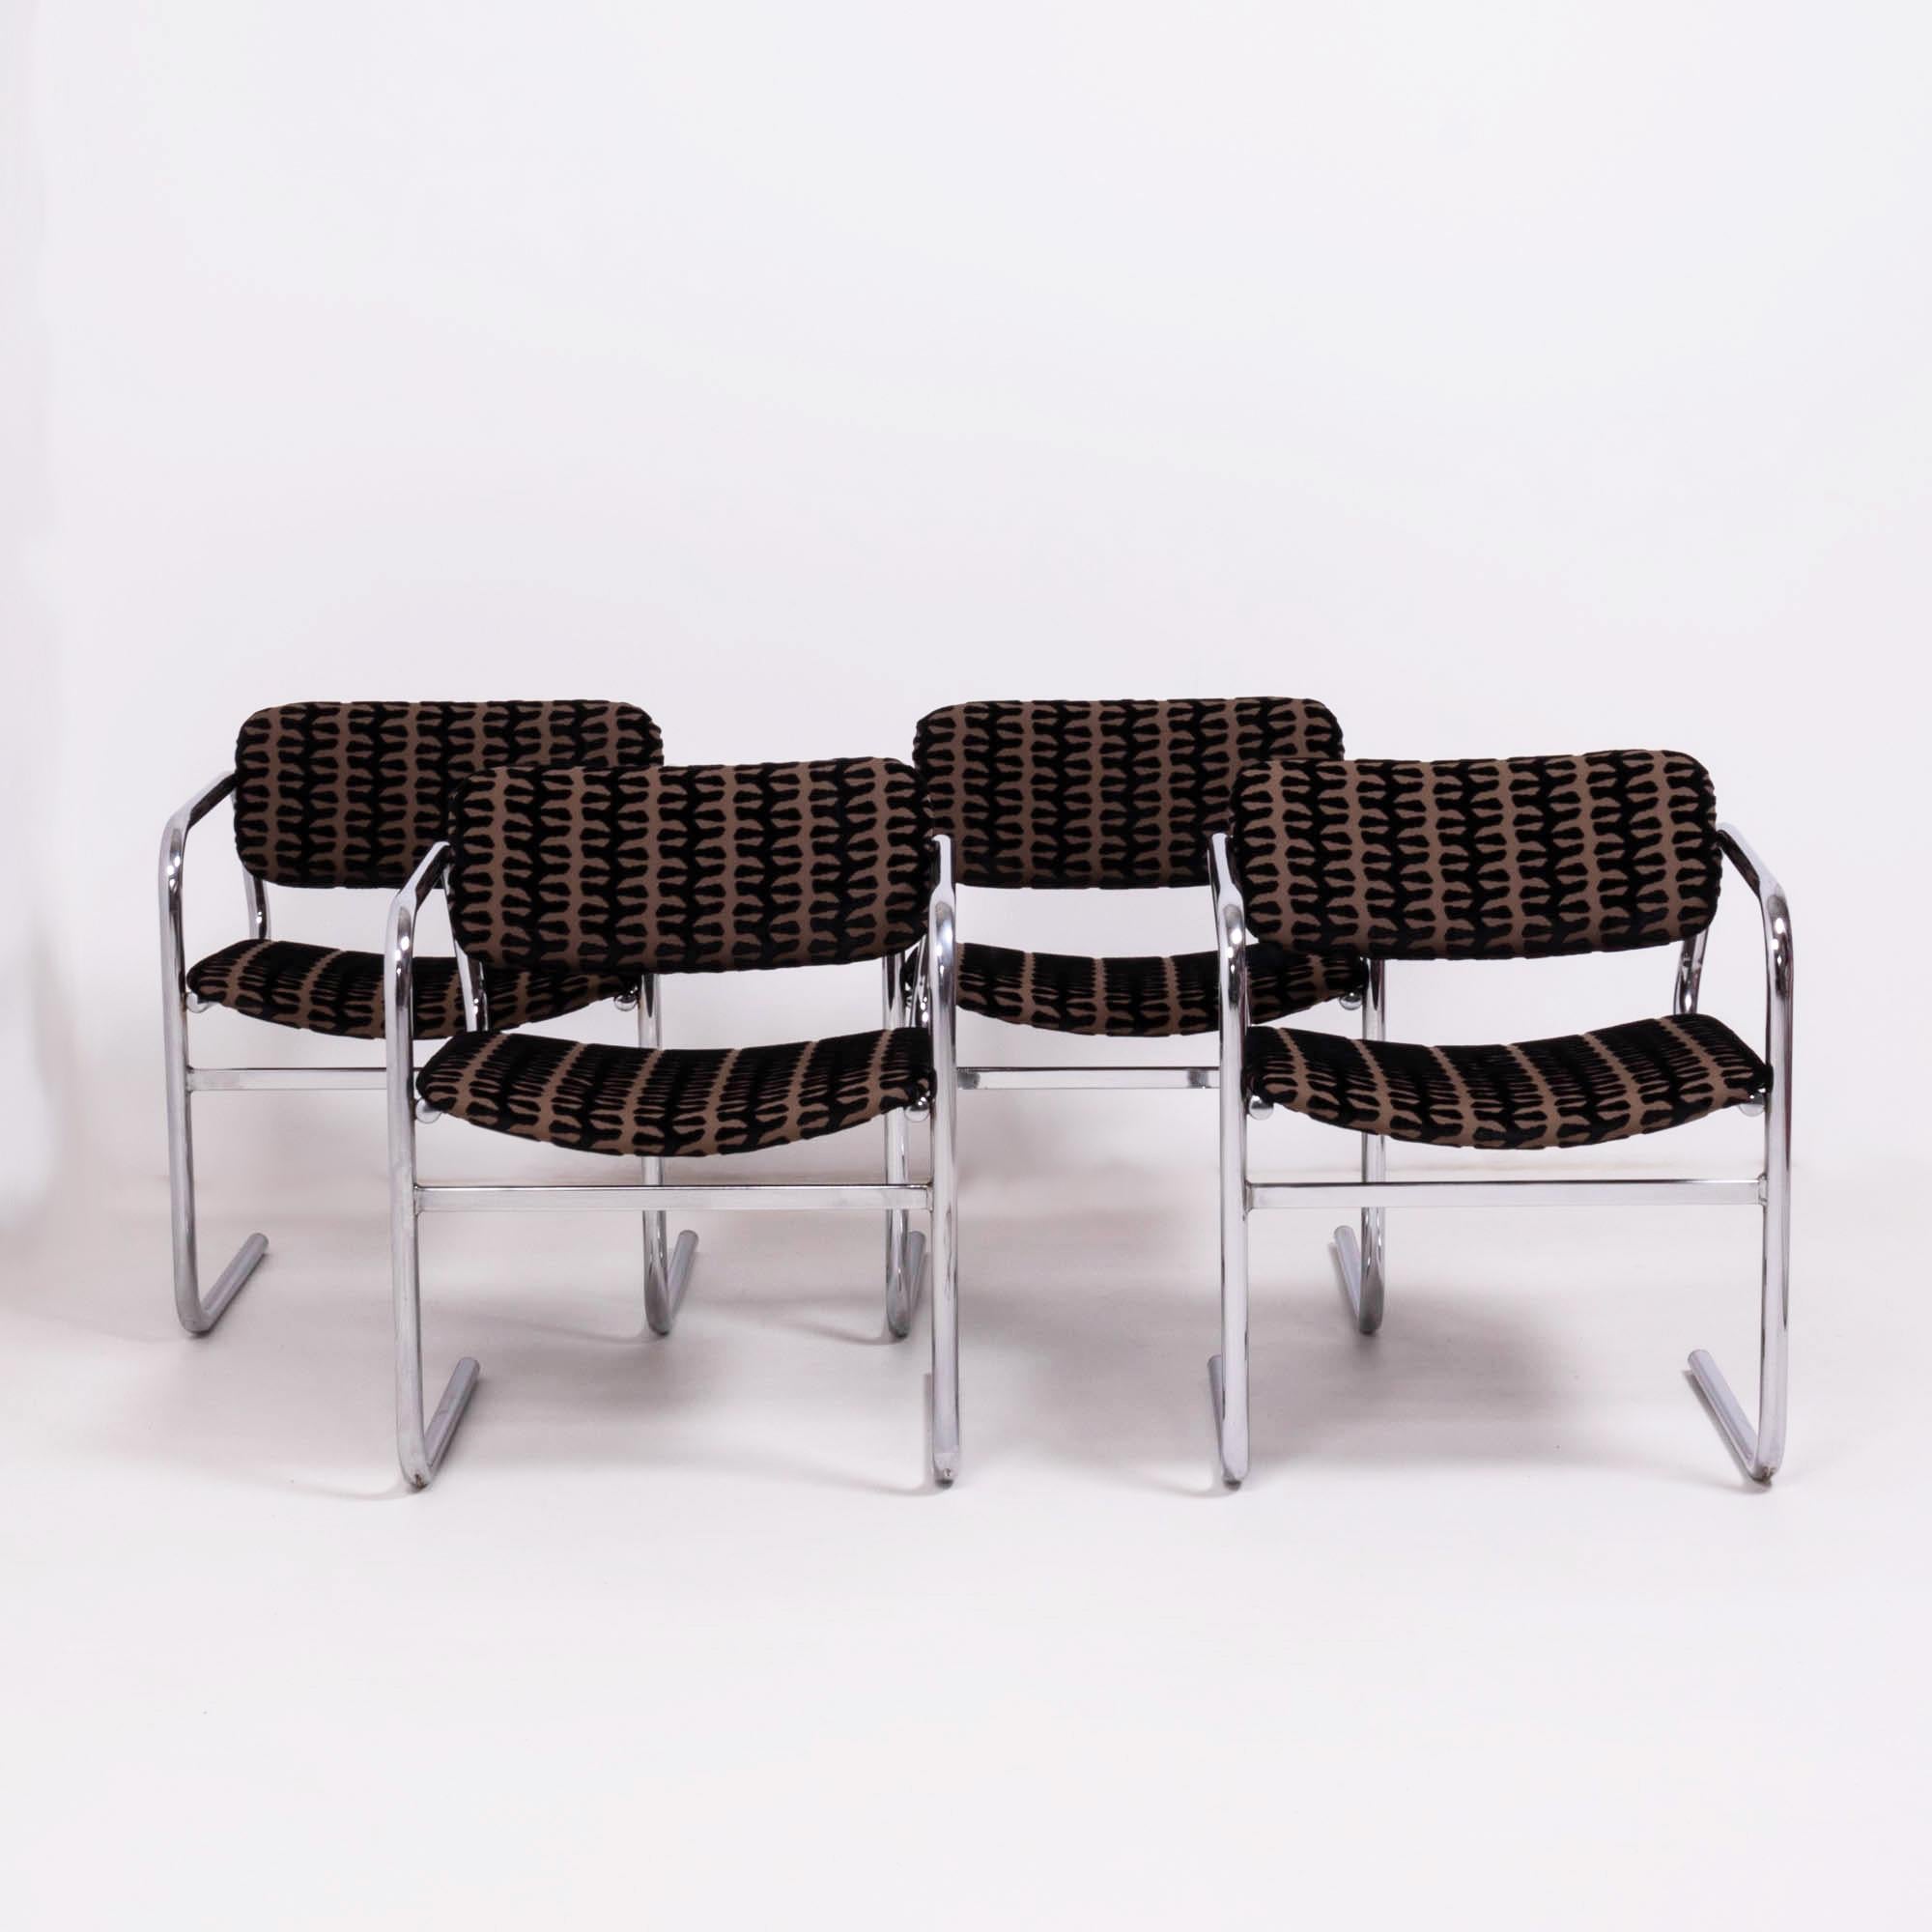 Designed and made by British furniture house Pieff, this set of four dining chairs is a fantastic example of Classic 1970s design.

Featuring chrome cantilever frames, the chairs have been newly reupholstered in black and brown flocked velvet